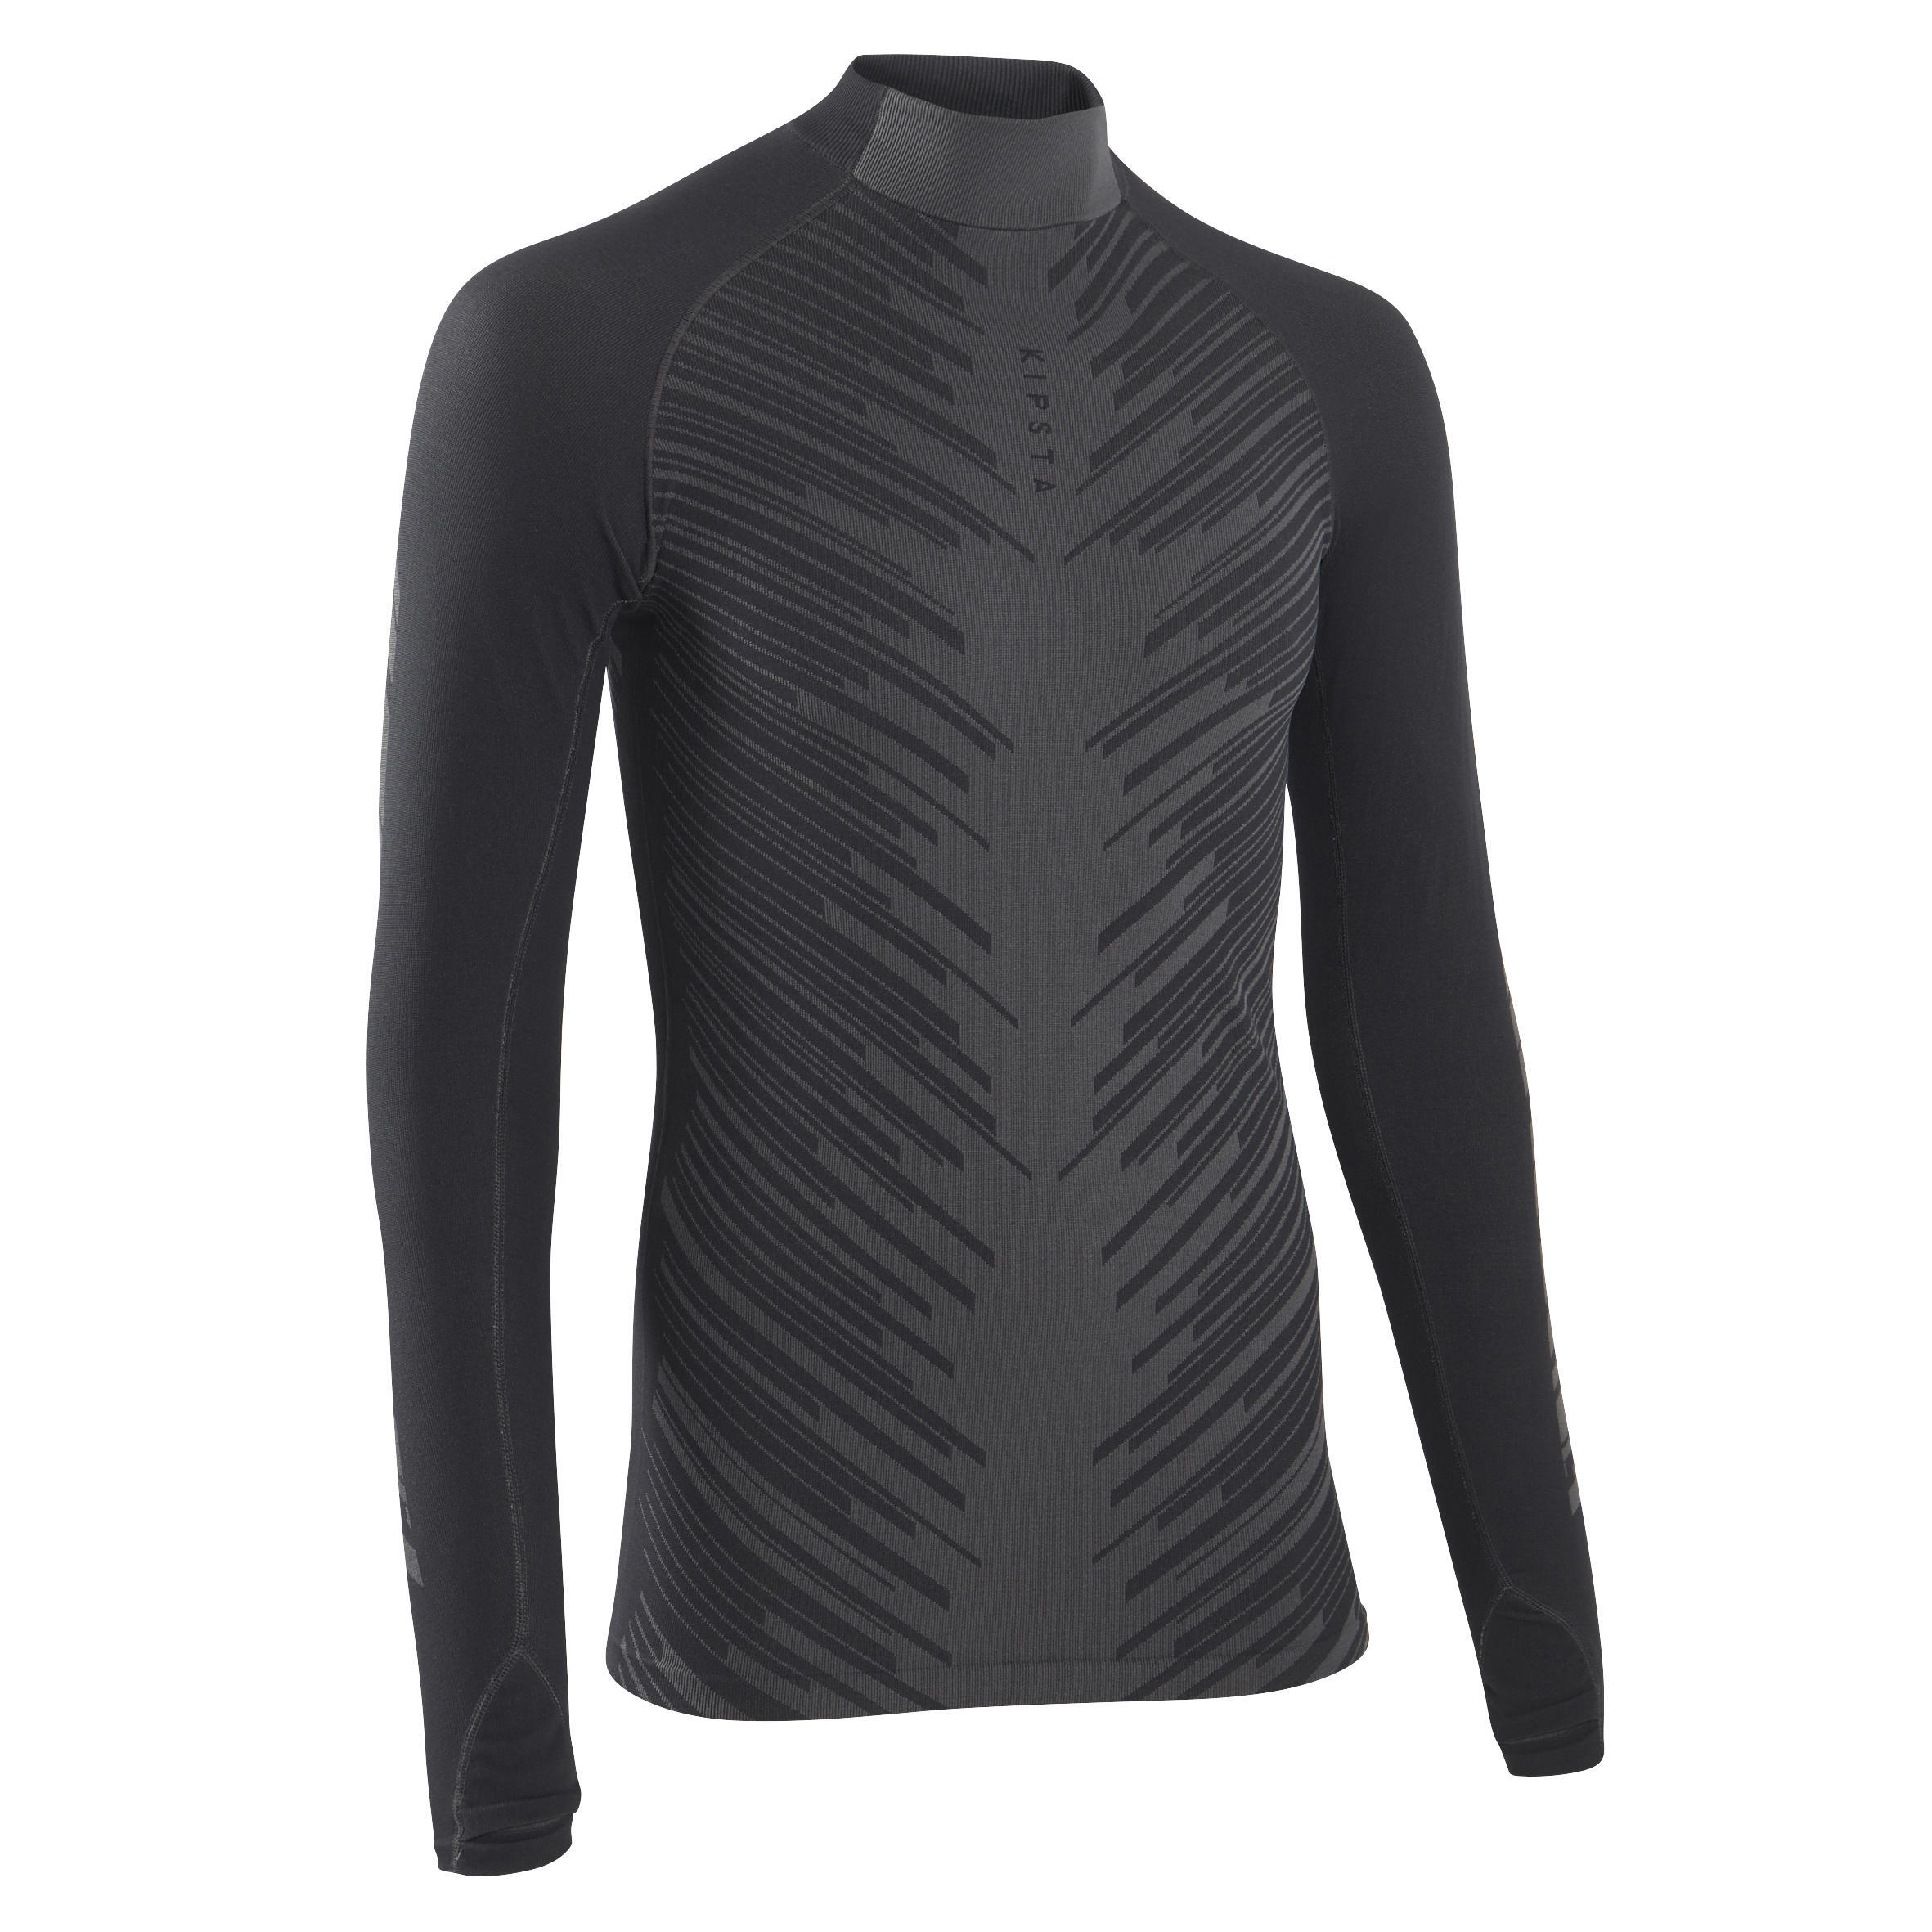 How Tight Should Base Layers Fit (Plus, Mistakes to Avoid